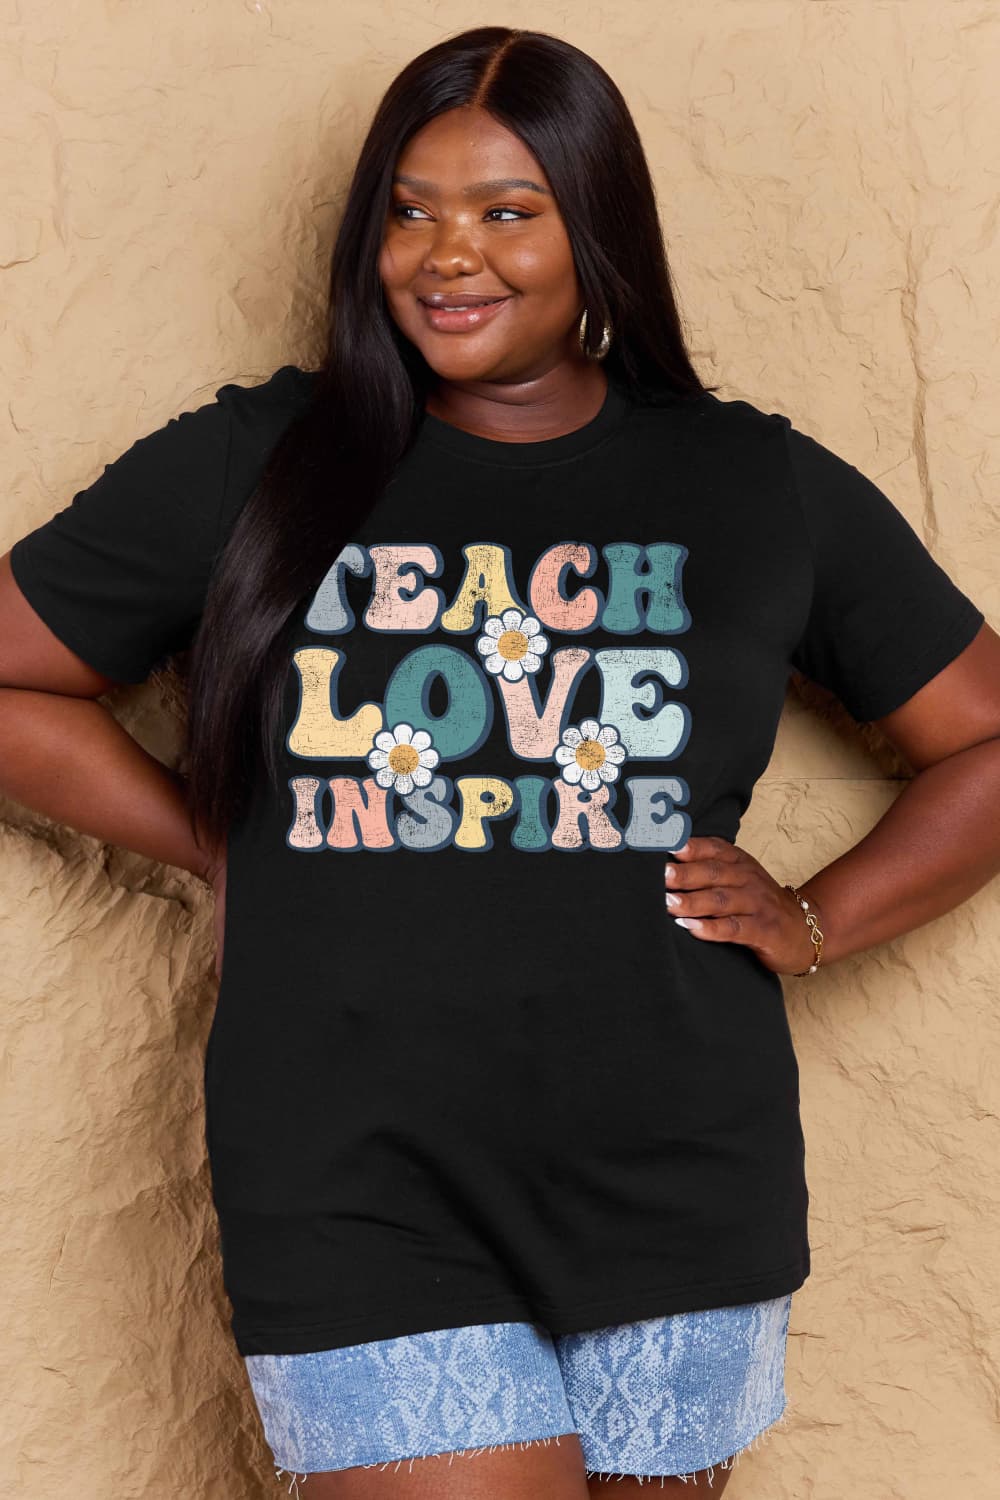 Simply Love Full Size TEACH LOVE INSPIRE Graphic Cotton T-Shirt - GemThreads Boutique